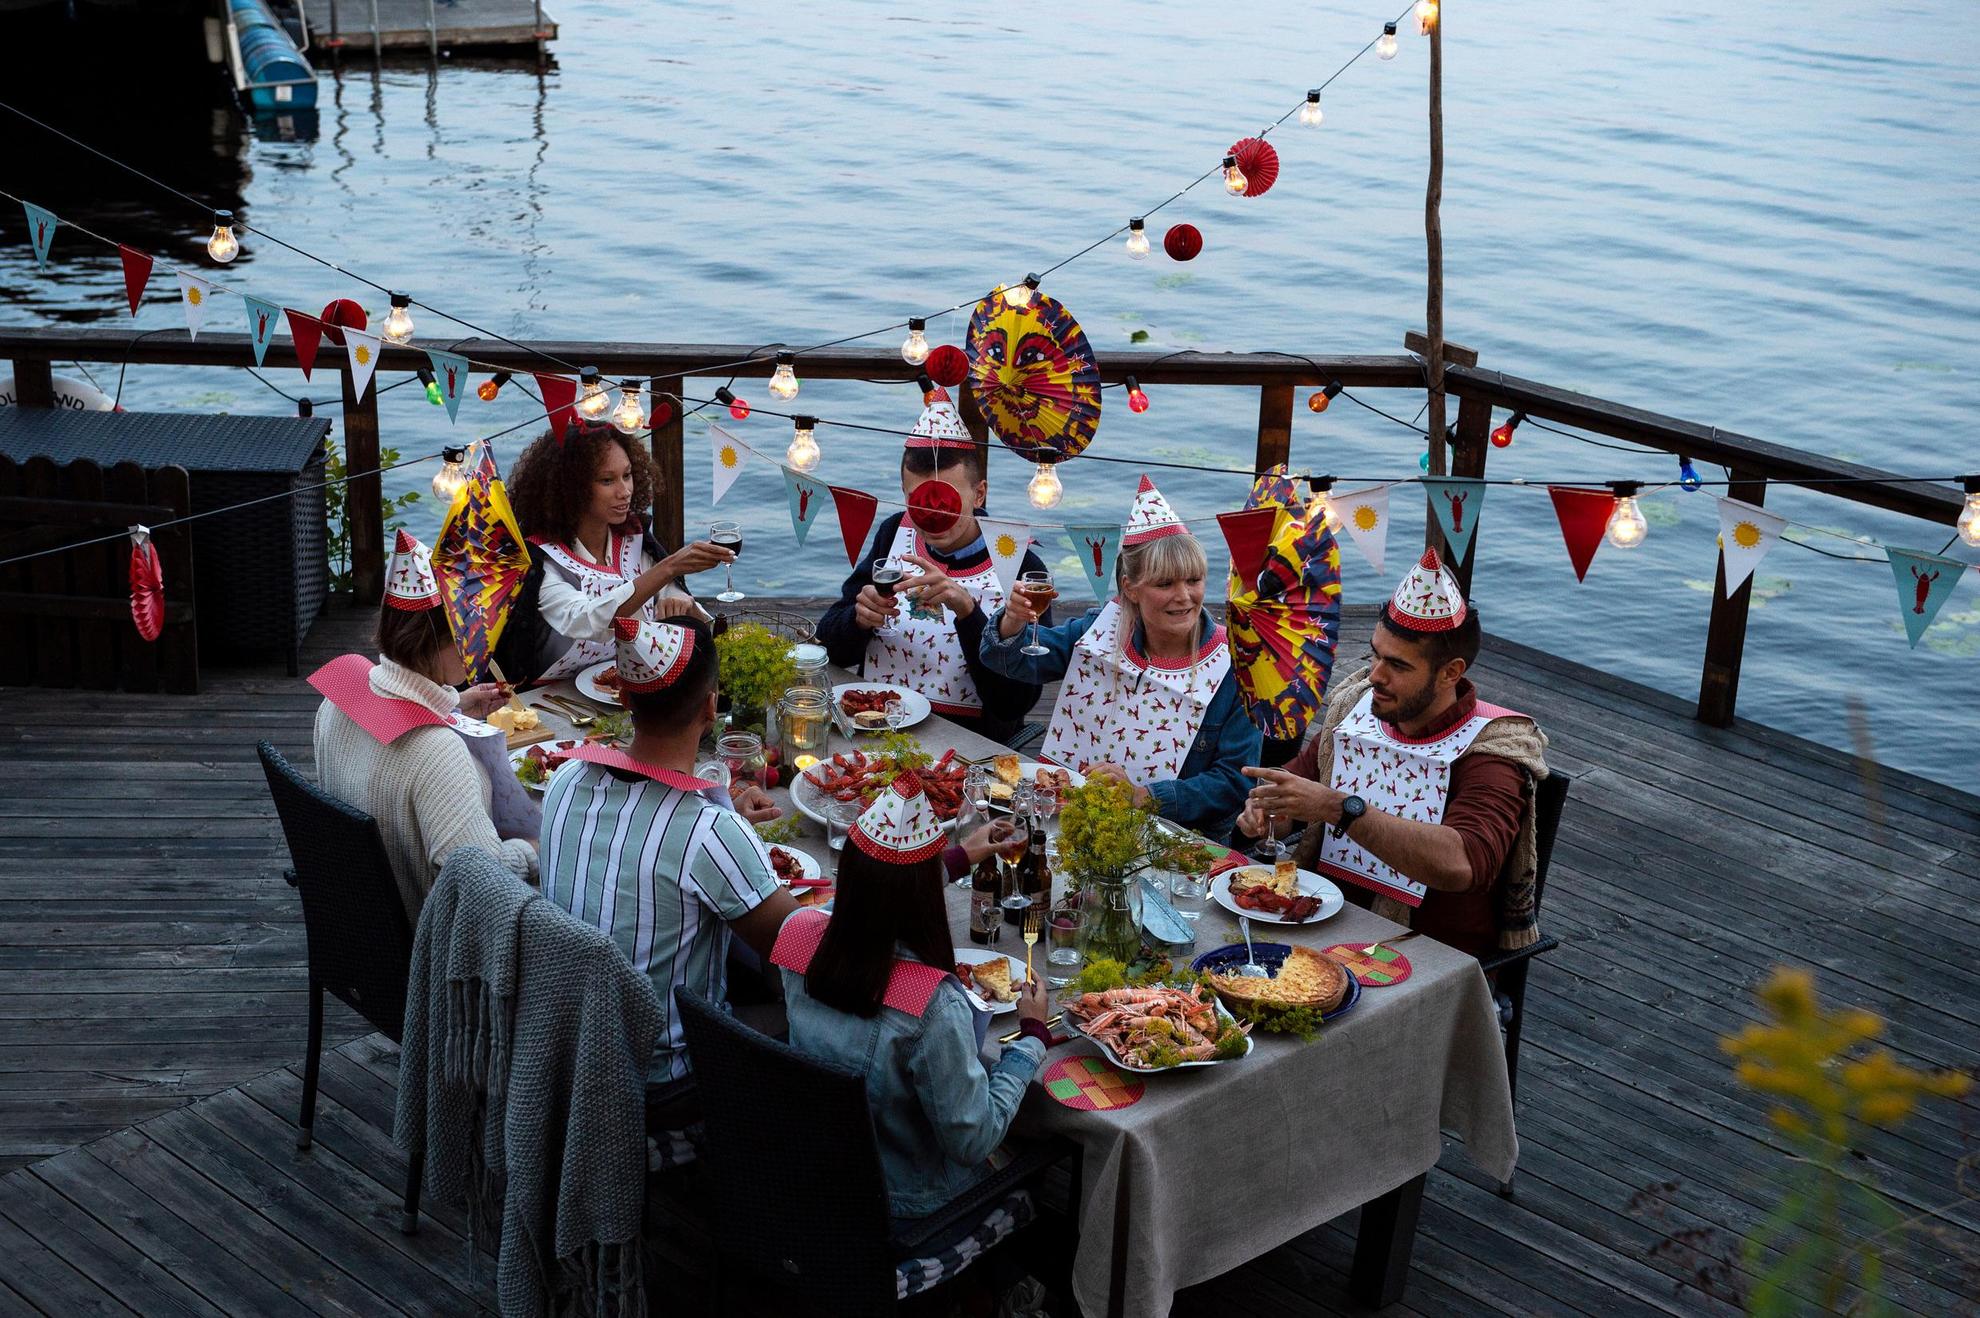 Crayfish party at a jetty by the sea. Seven peoples around a table dressed in paper hats and bibs are eating crayfish. There are paper lanterns, lights and decorations above the table.